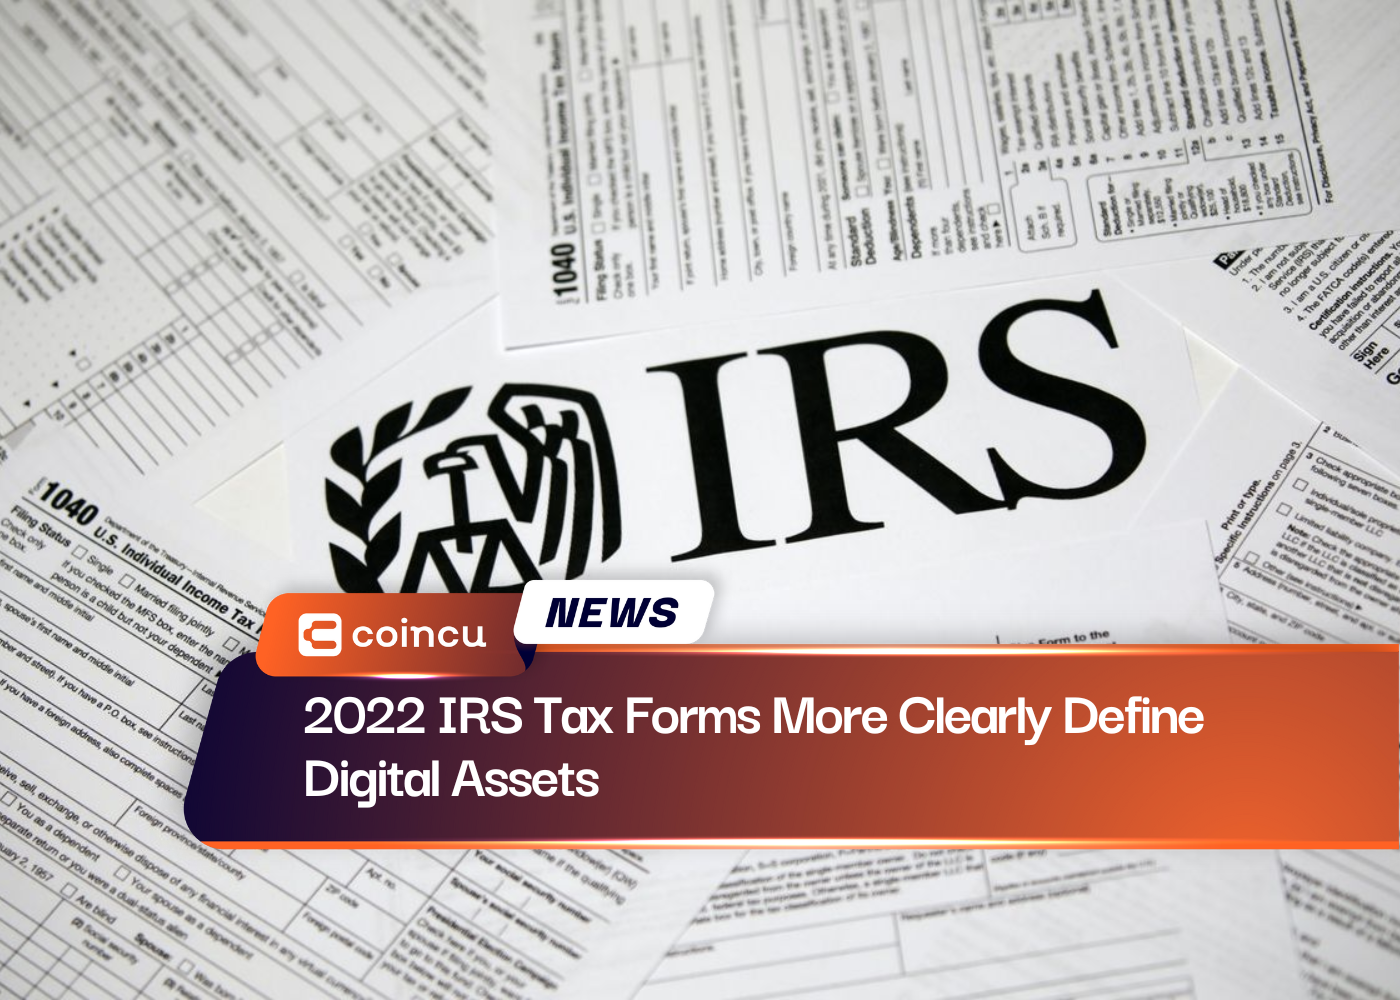 2022 IRS Tax Forms More Clearly Define Digital Assets